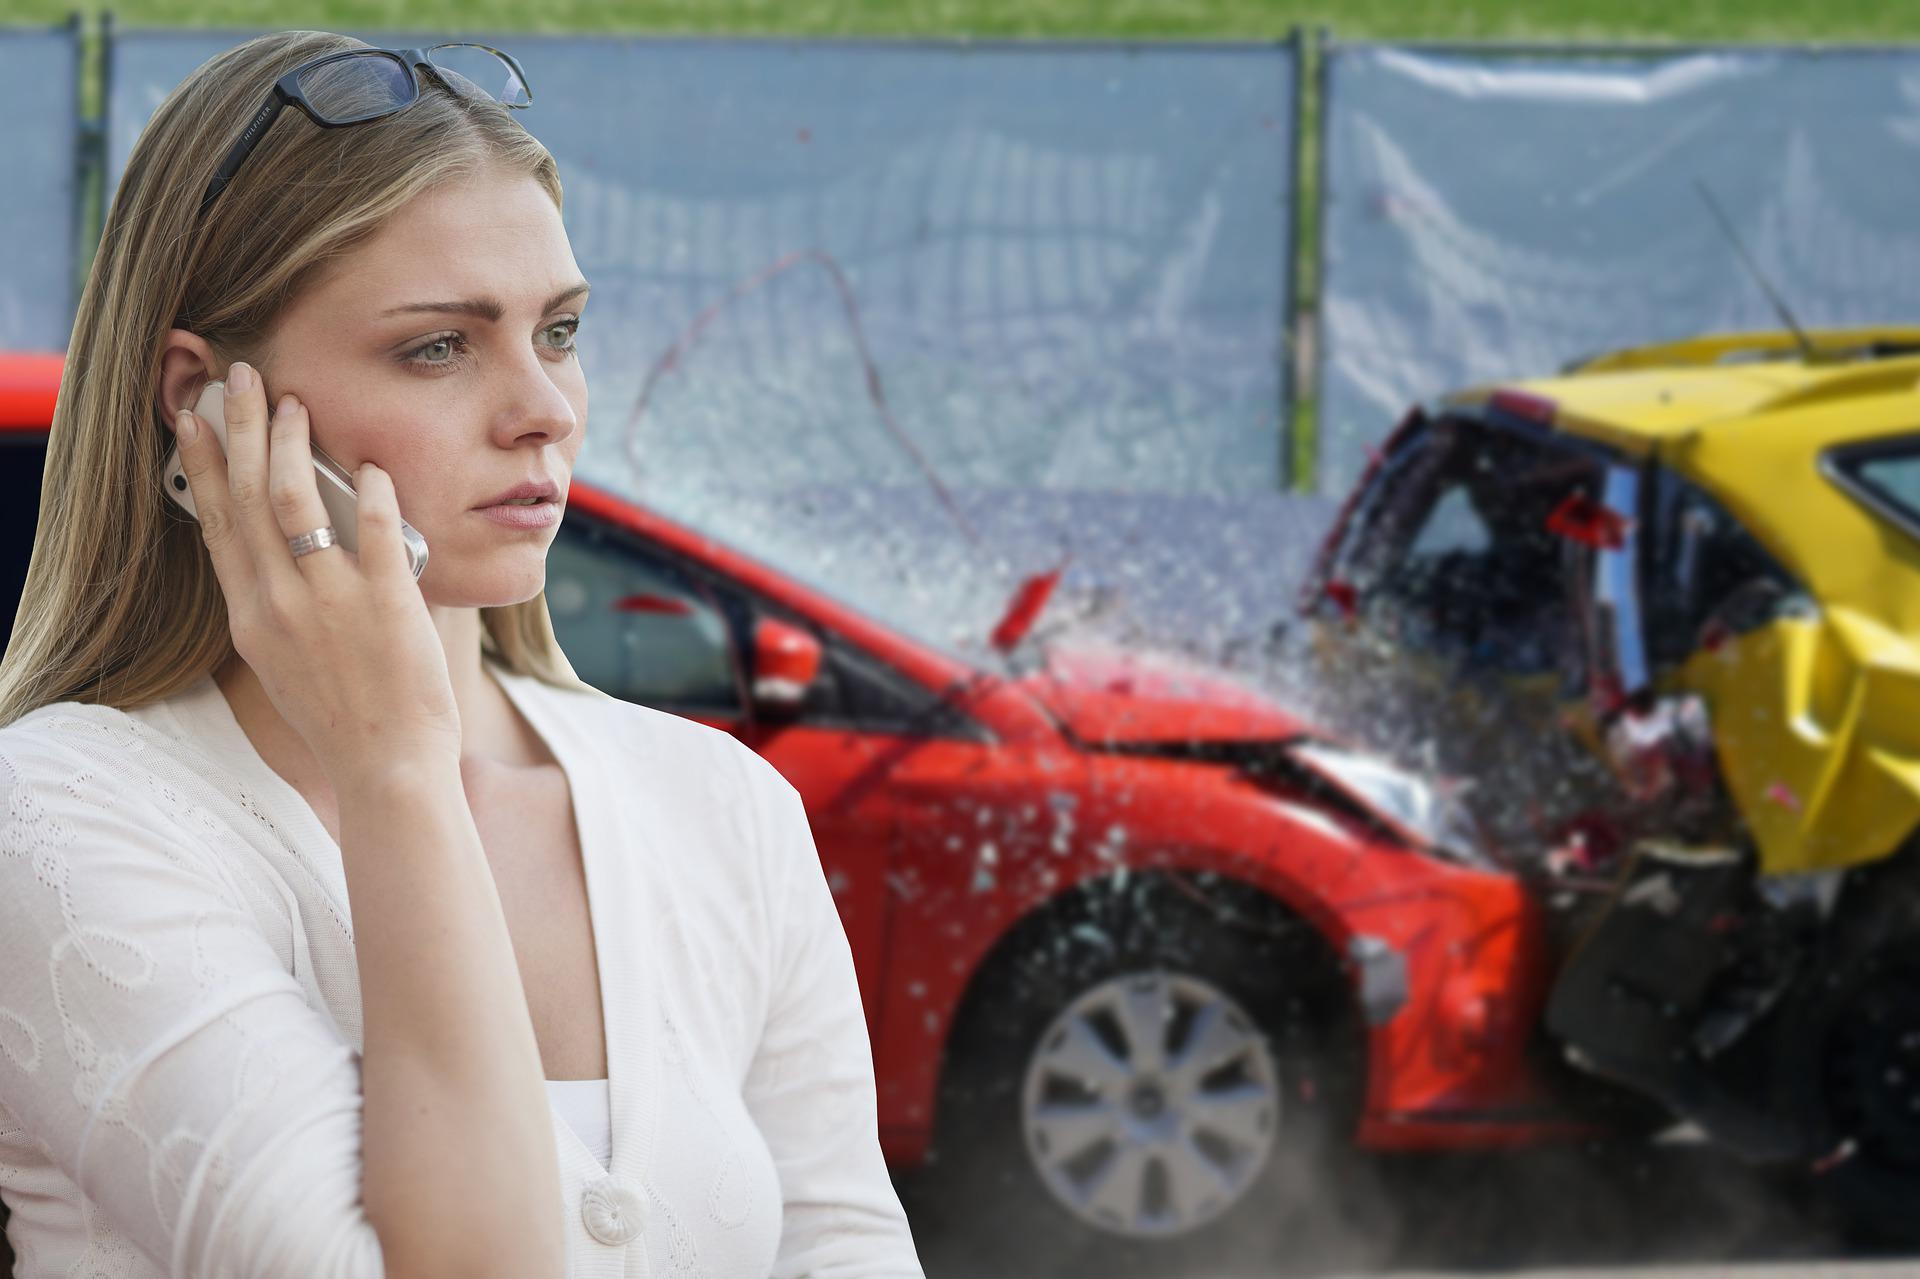 How Injury Lawyers Can Help After a Vehicle Accident